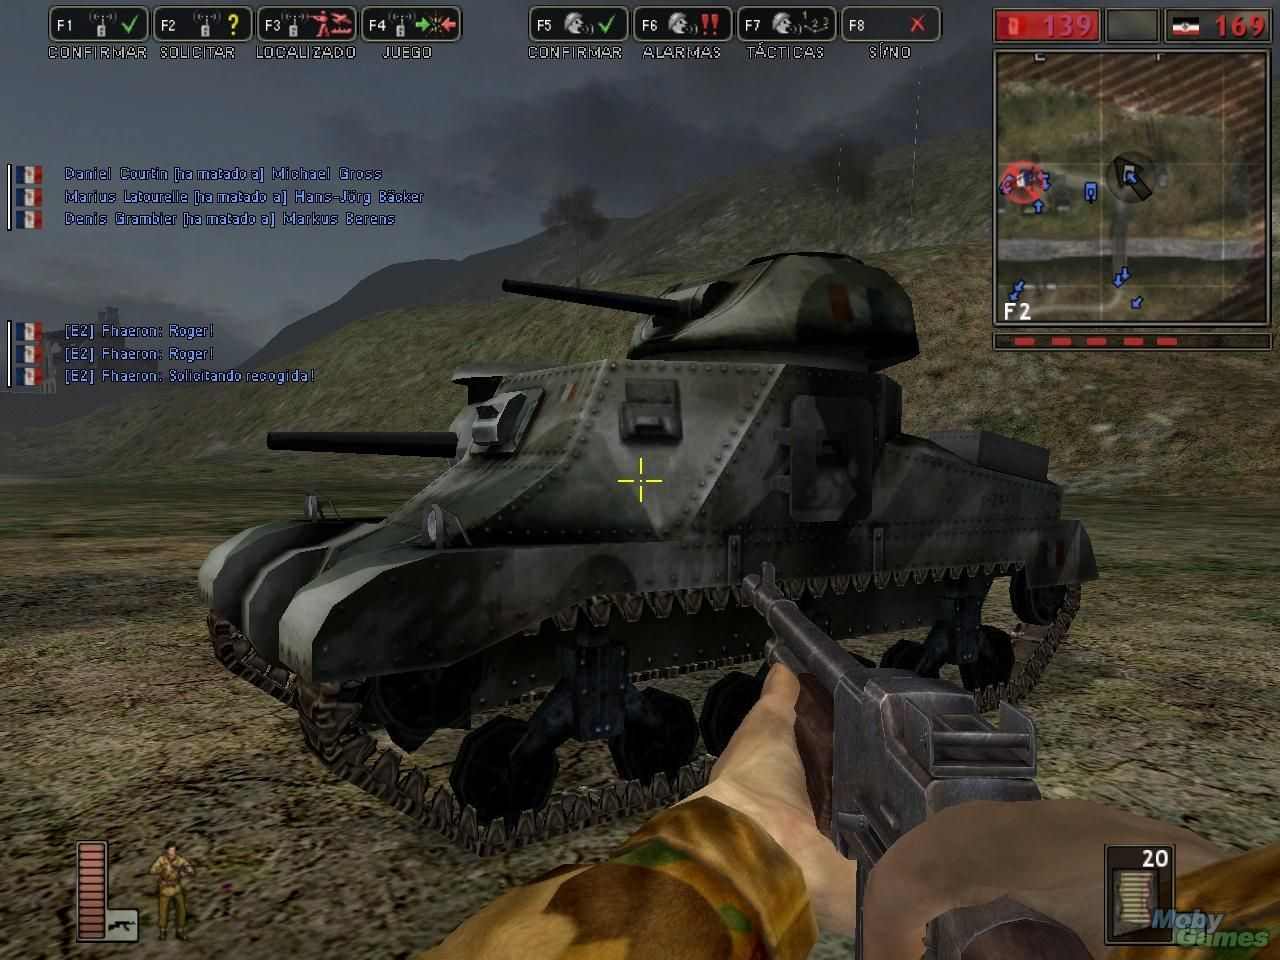 battlefield 1942 download for pc